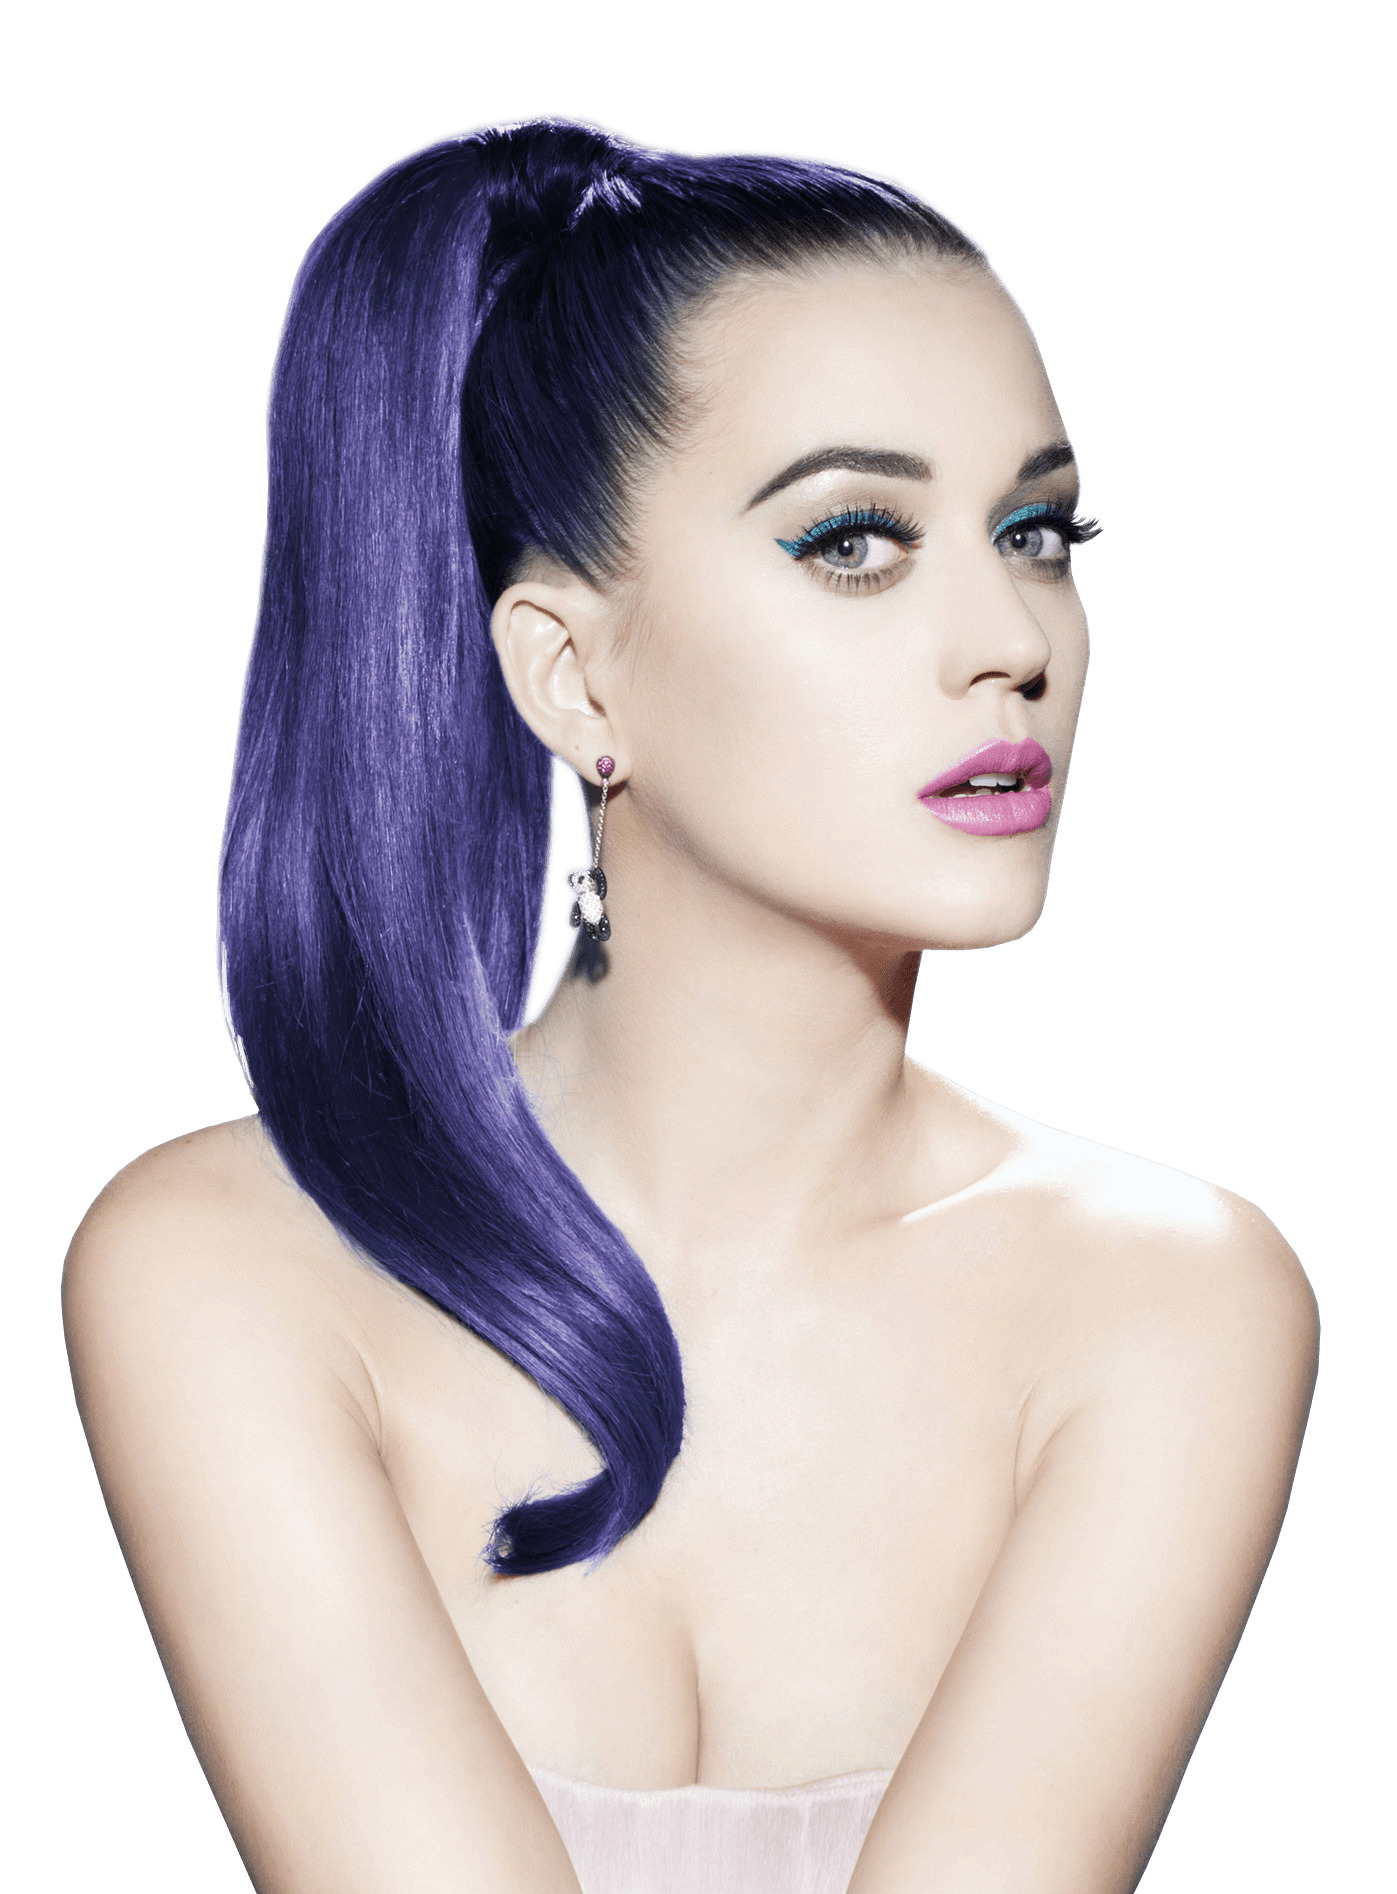 Innocent Katy Perry icons